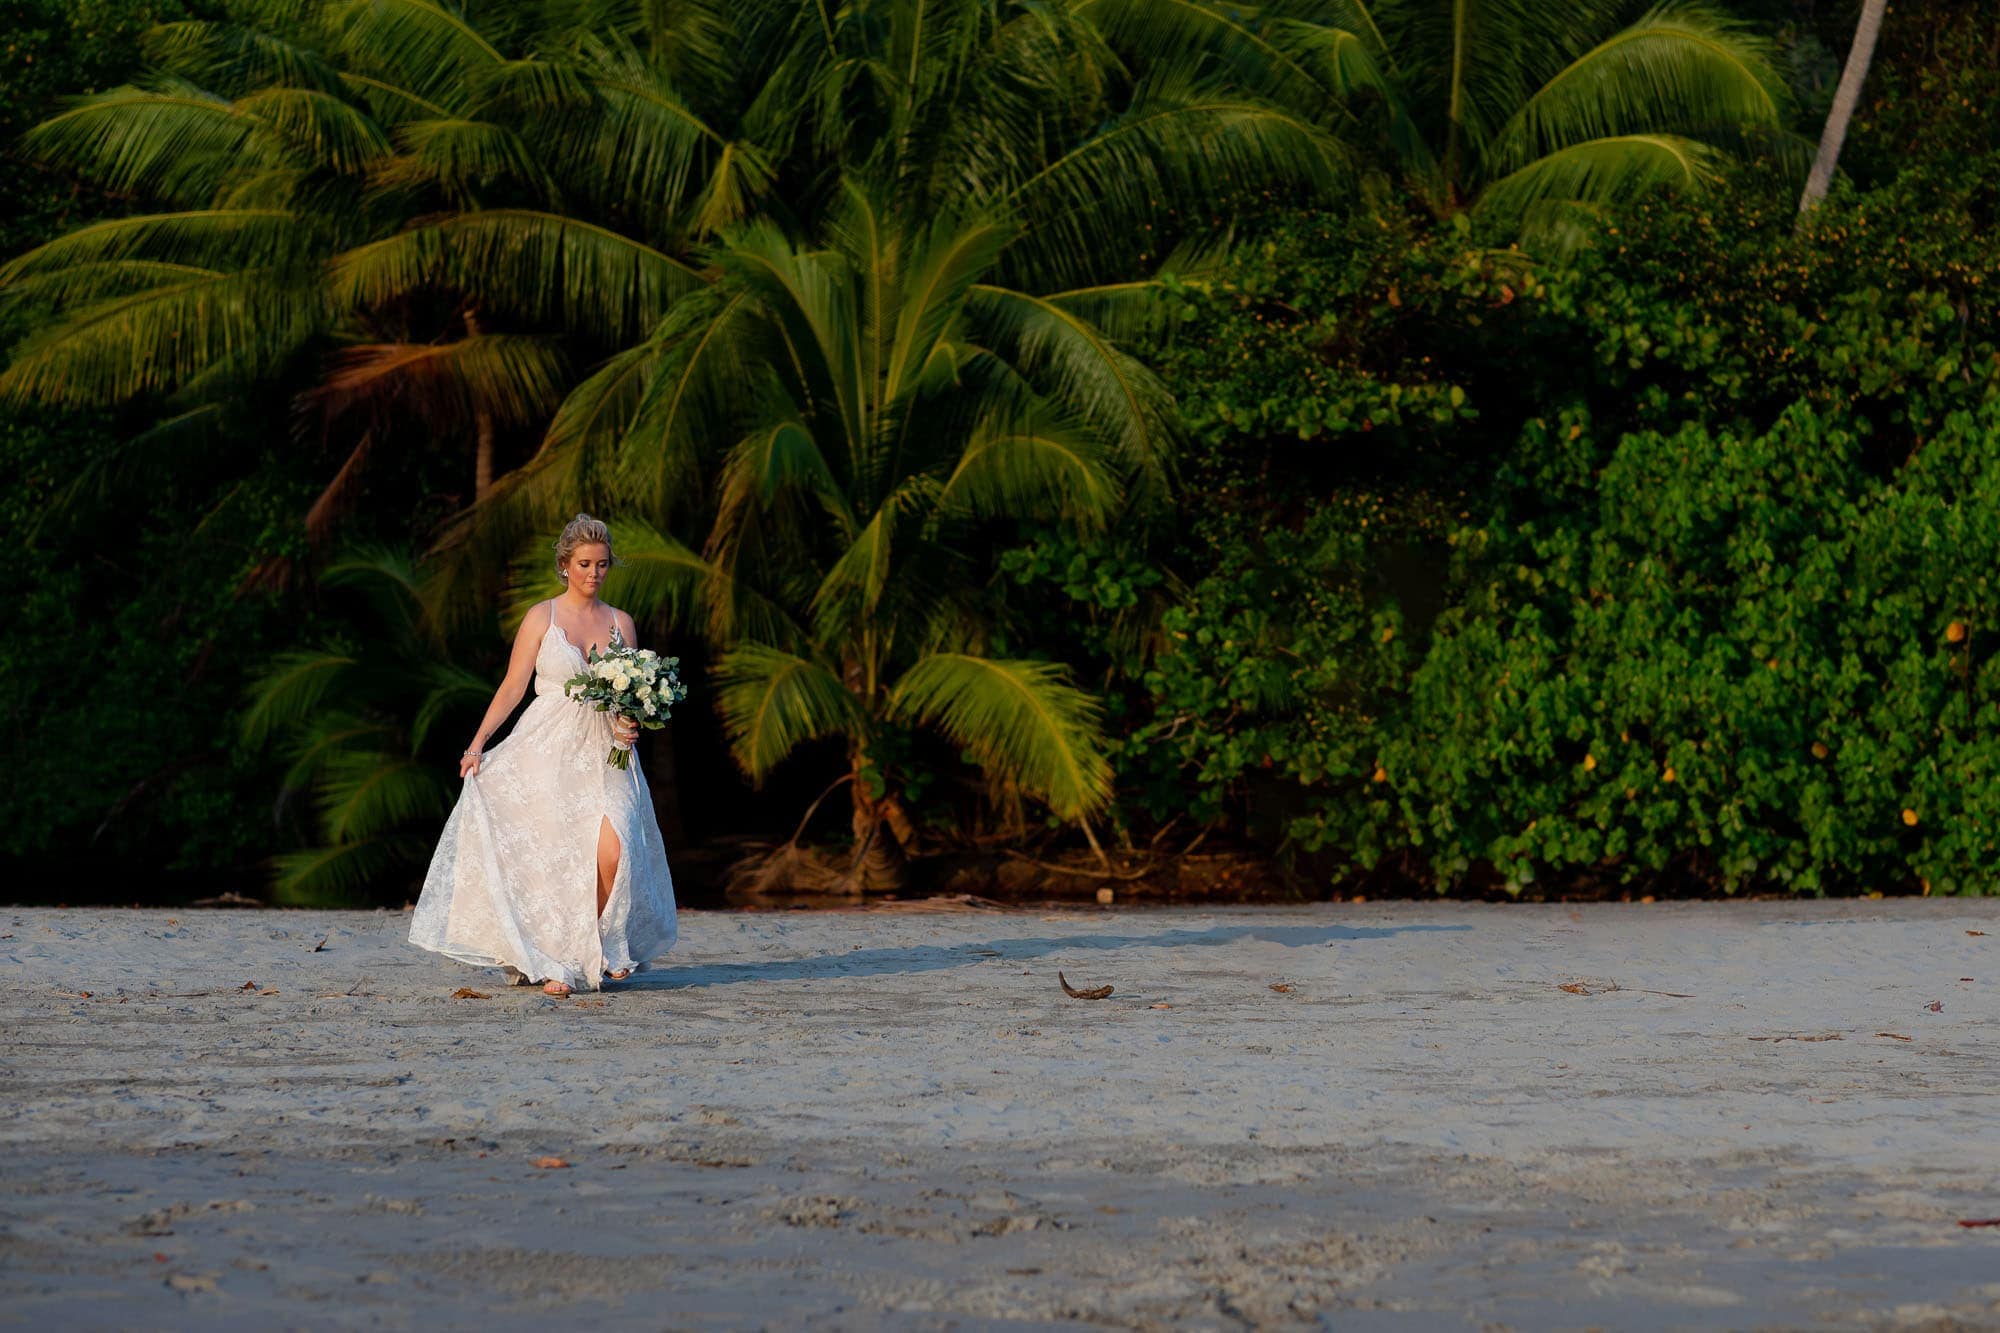 The bride arriving at the ceremony location on the beach